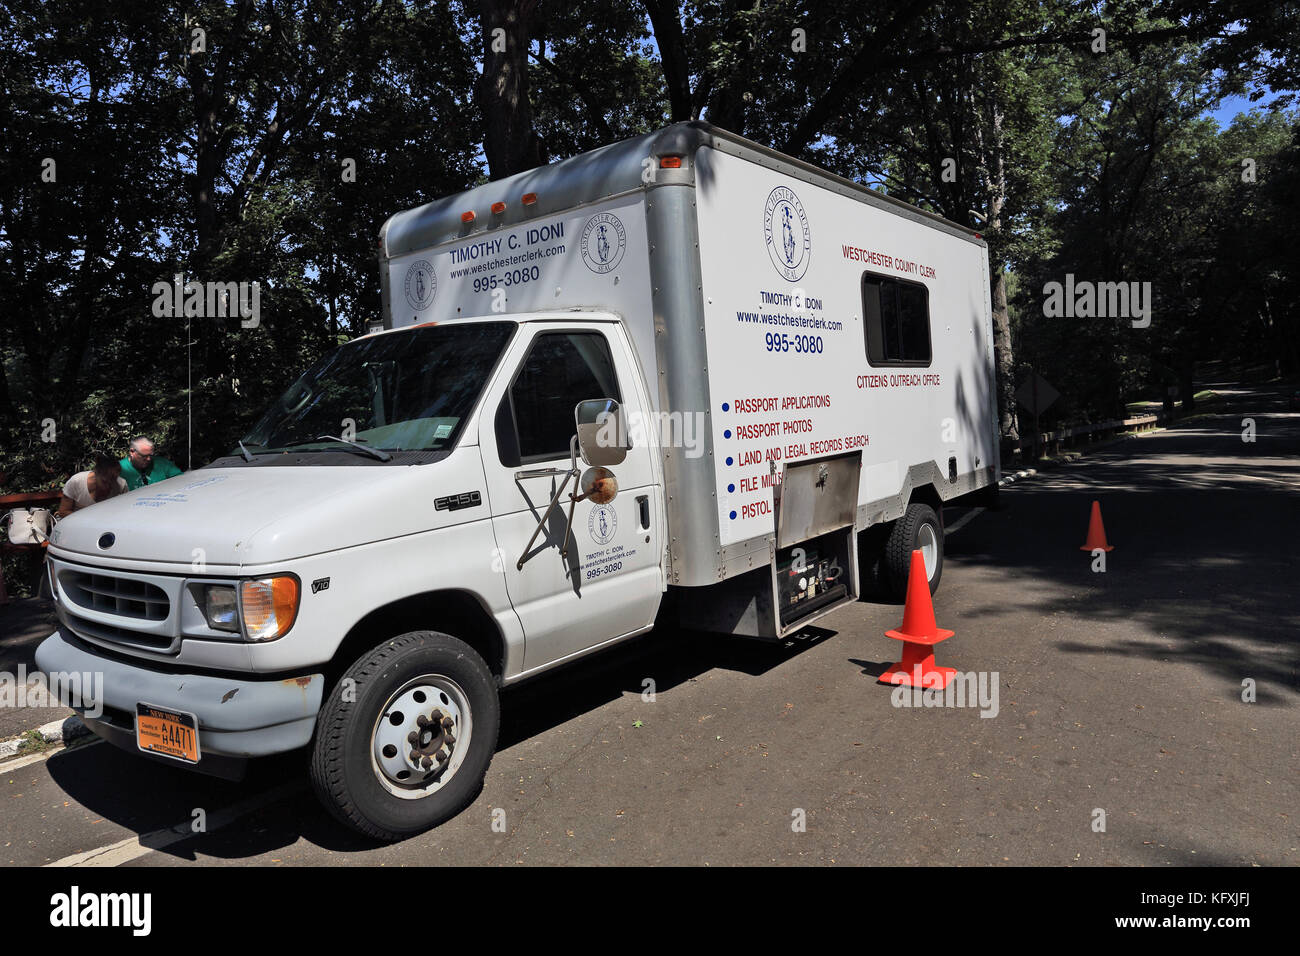 Mobile government office Yonkers, New York Stockfoto